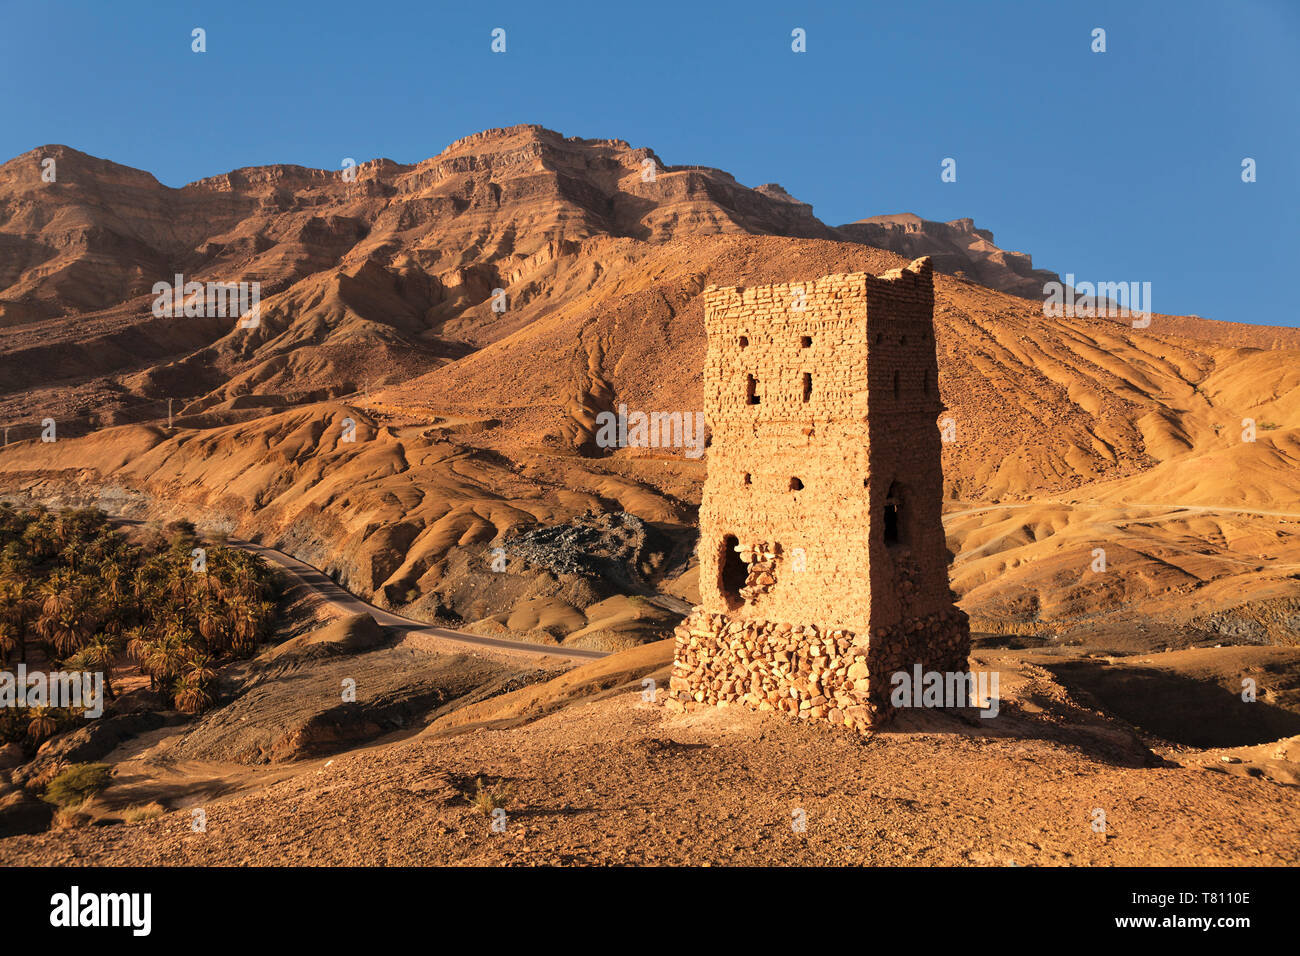 Tower, Draa Valley, Djebel Kissane Mountain, Morocco, North Africa, Africa Stock Photo